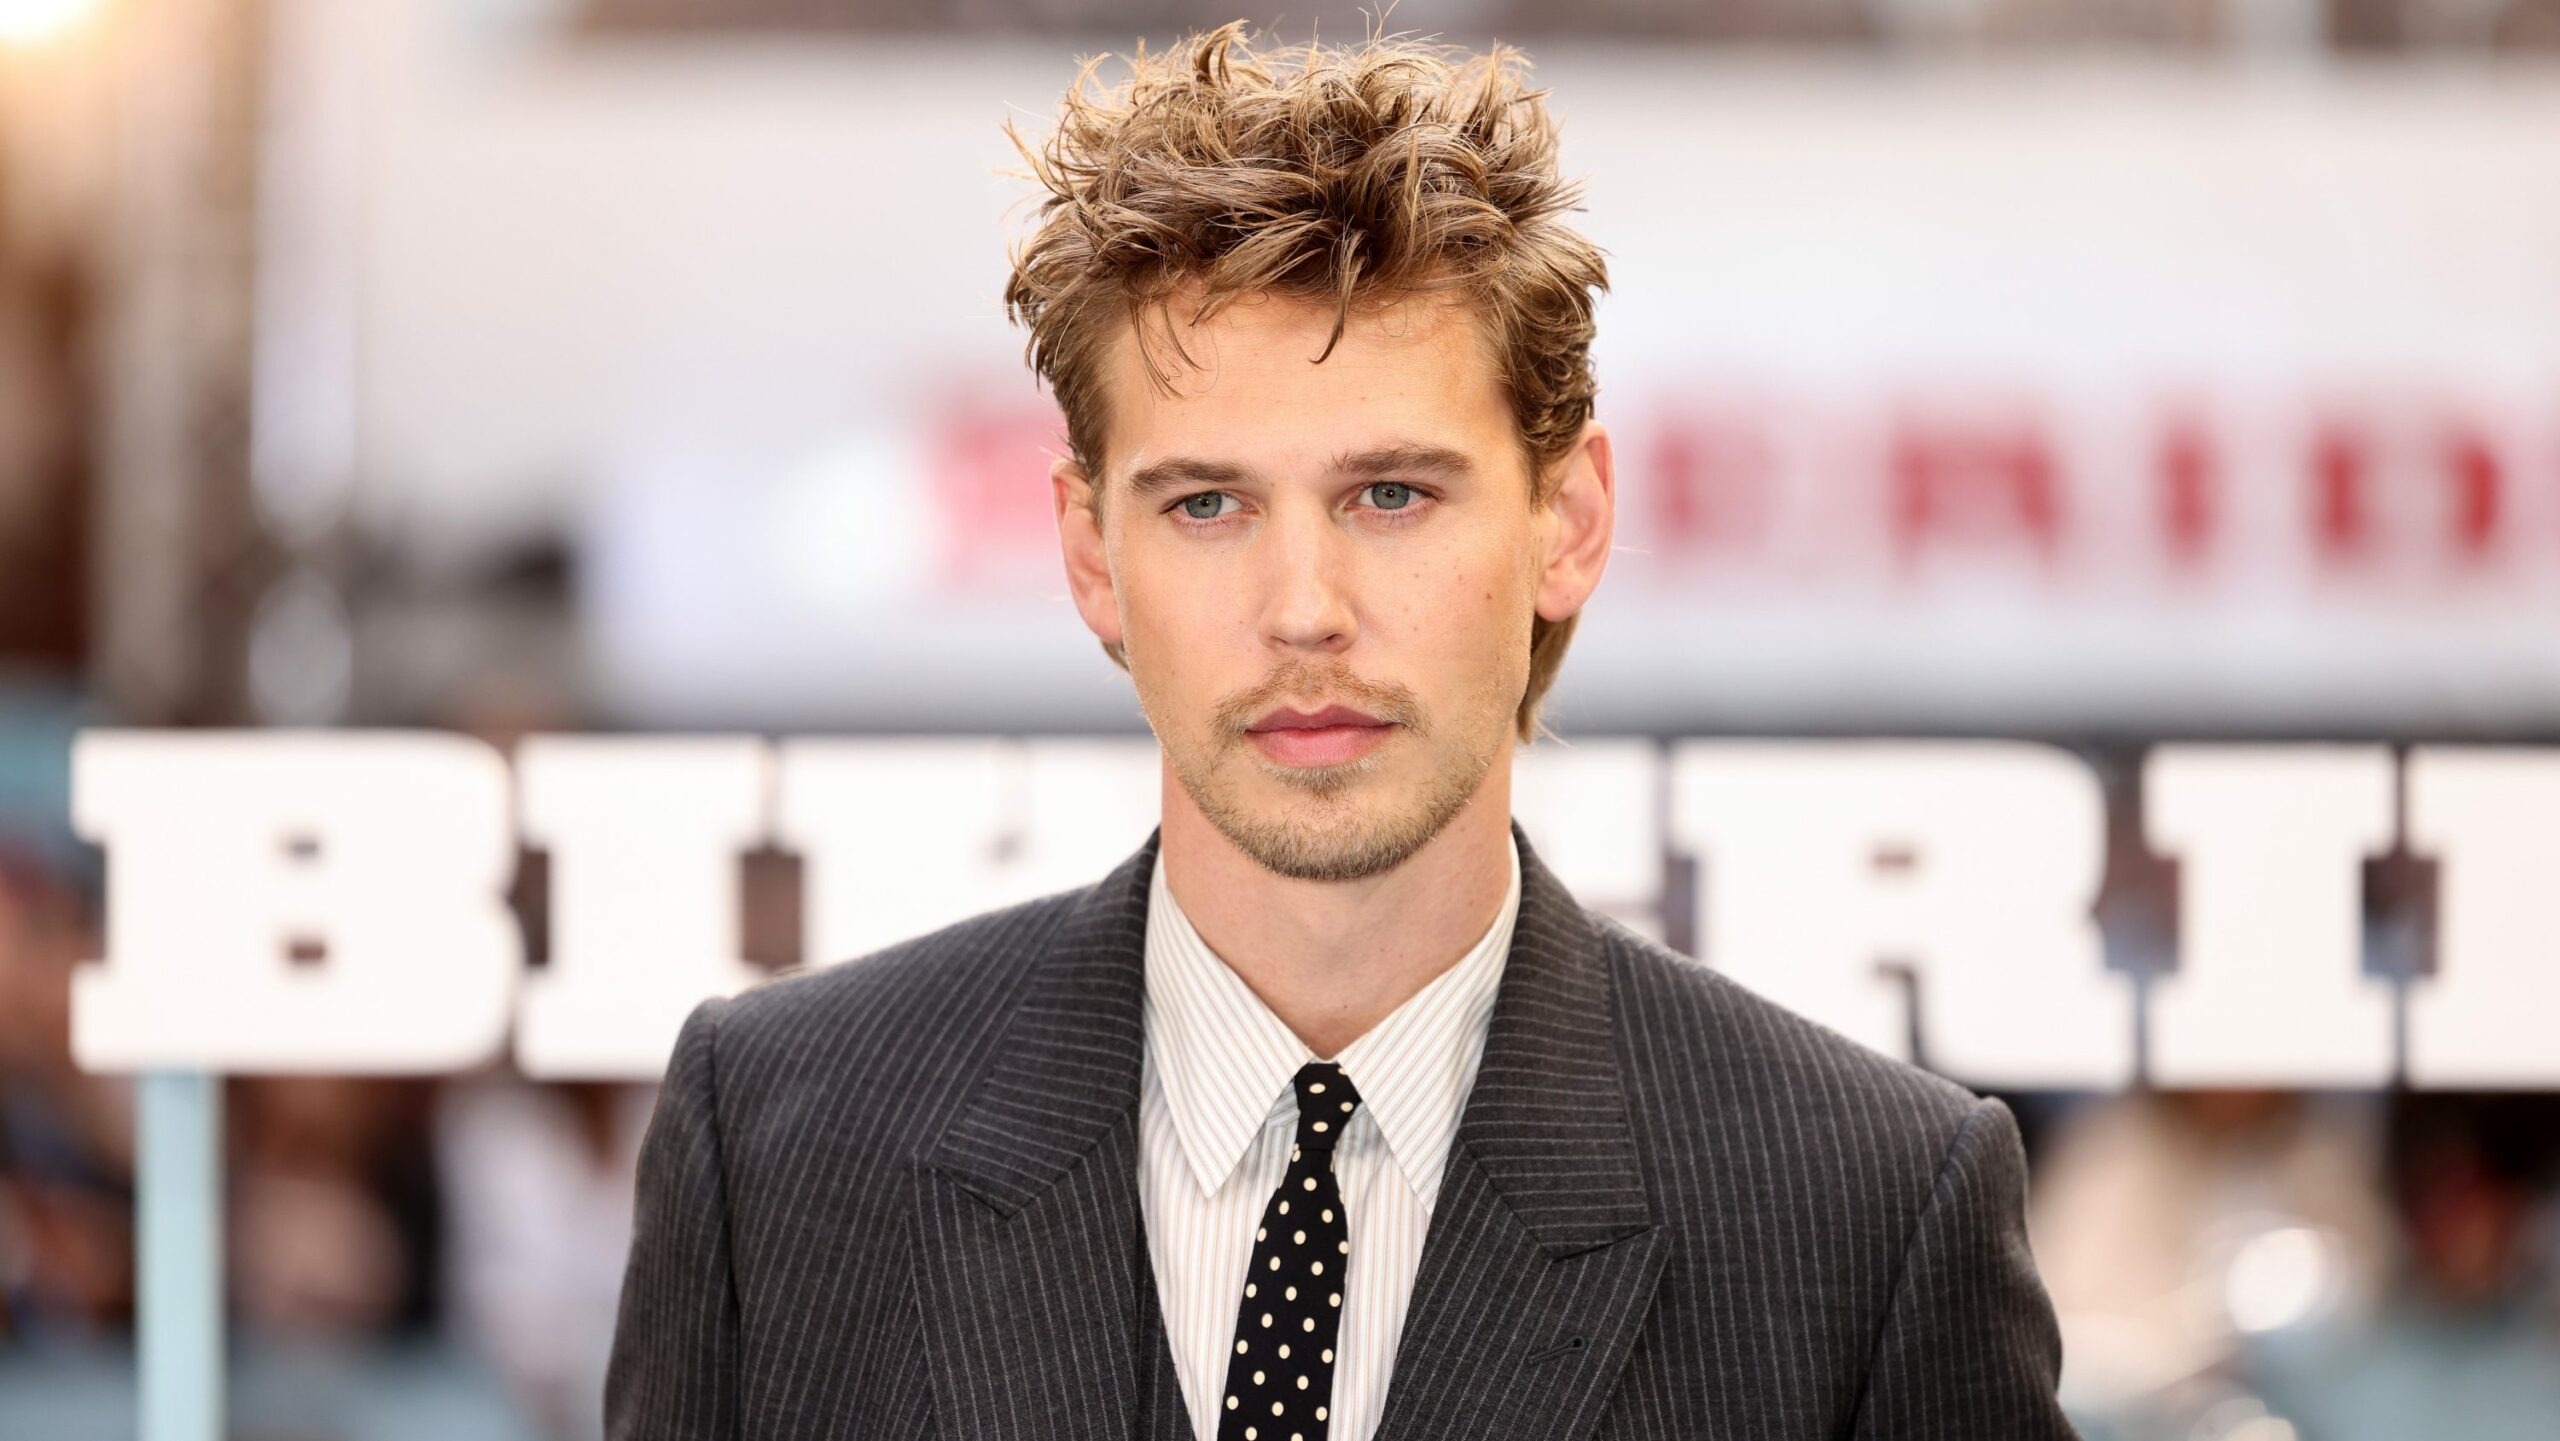 Austin Butler Discusses Auditioning for Peeta in The Hunger Games